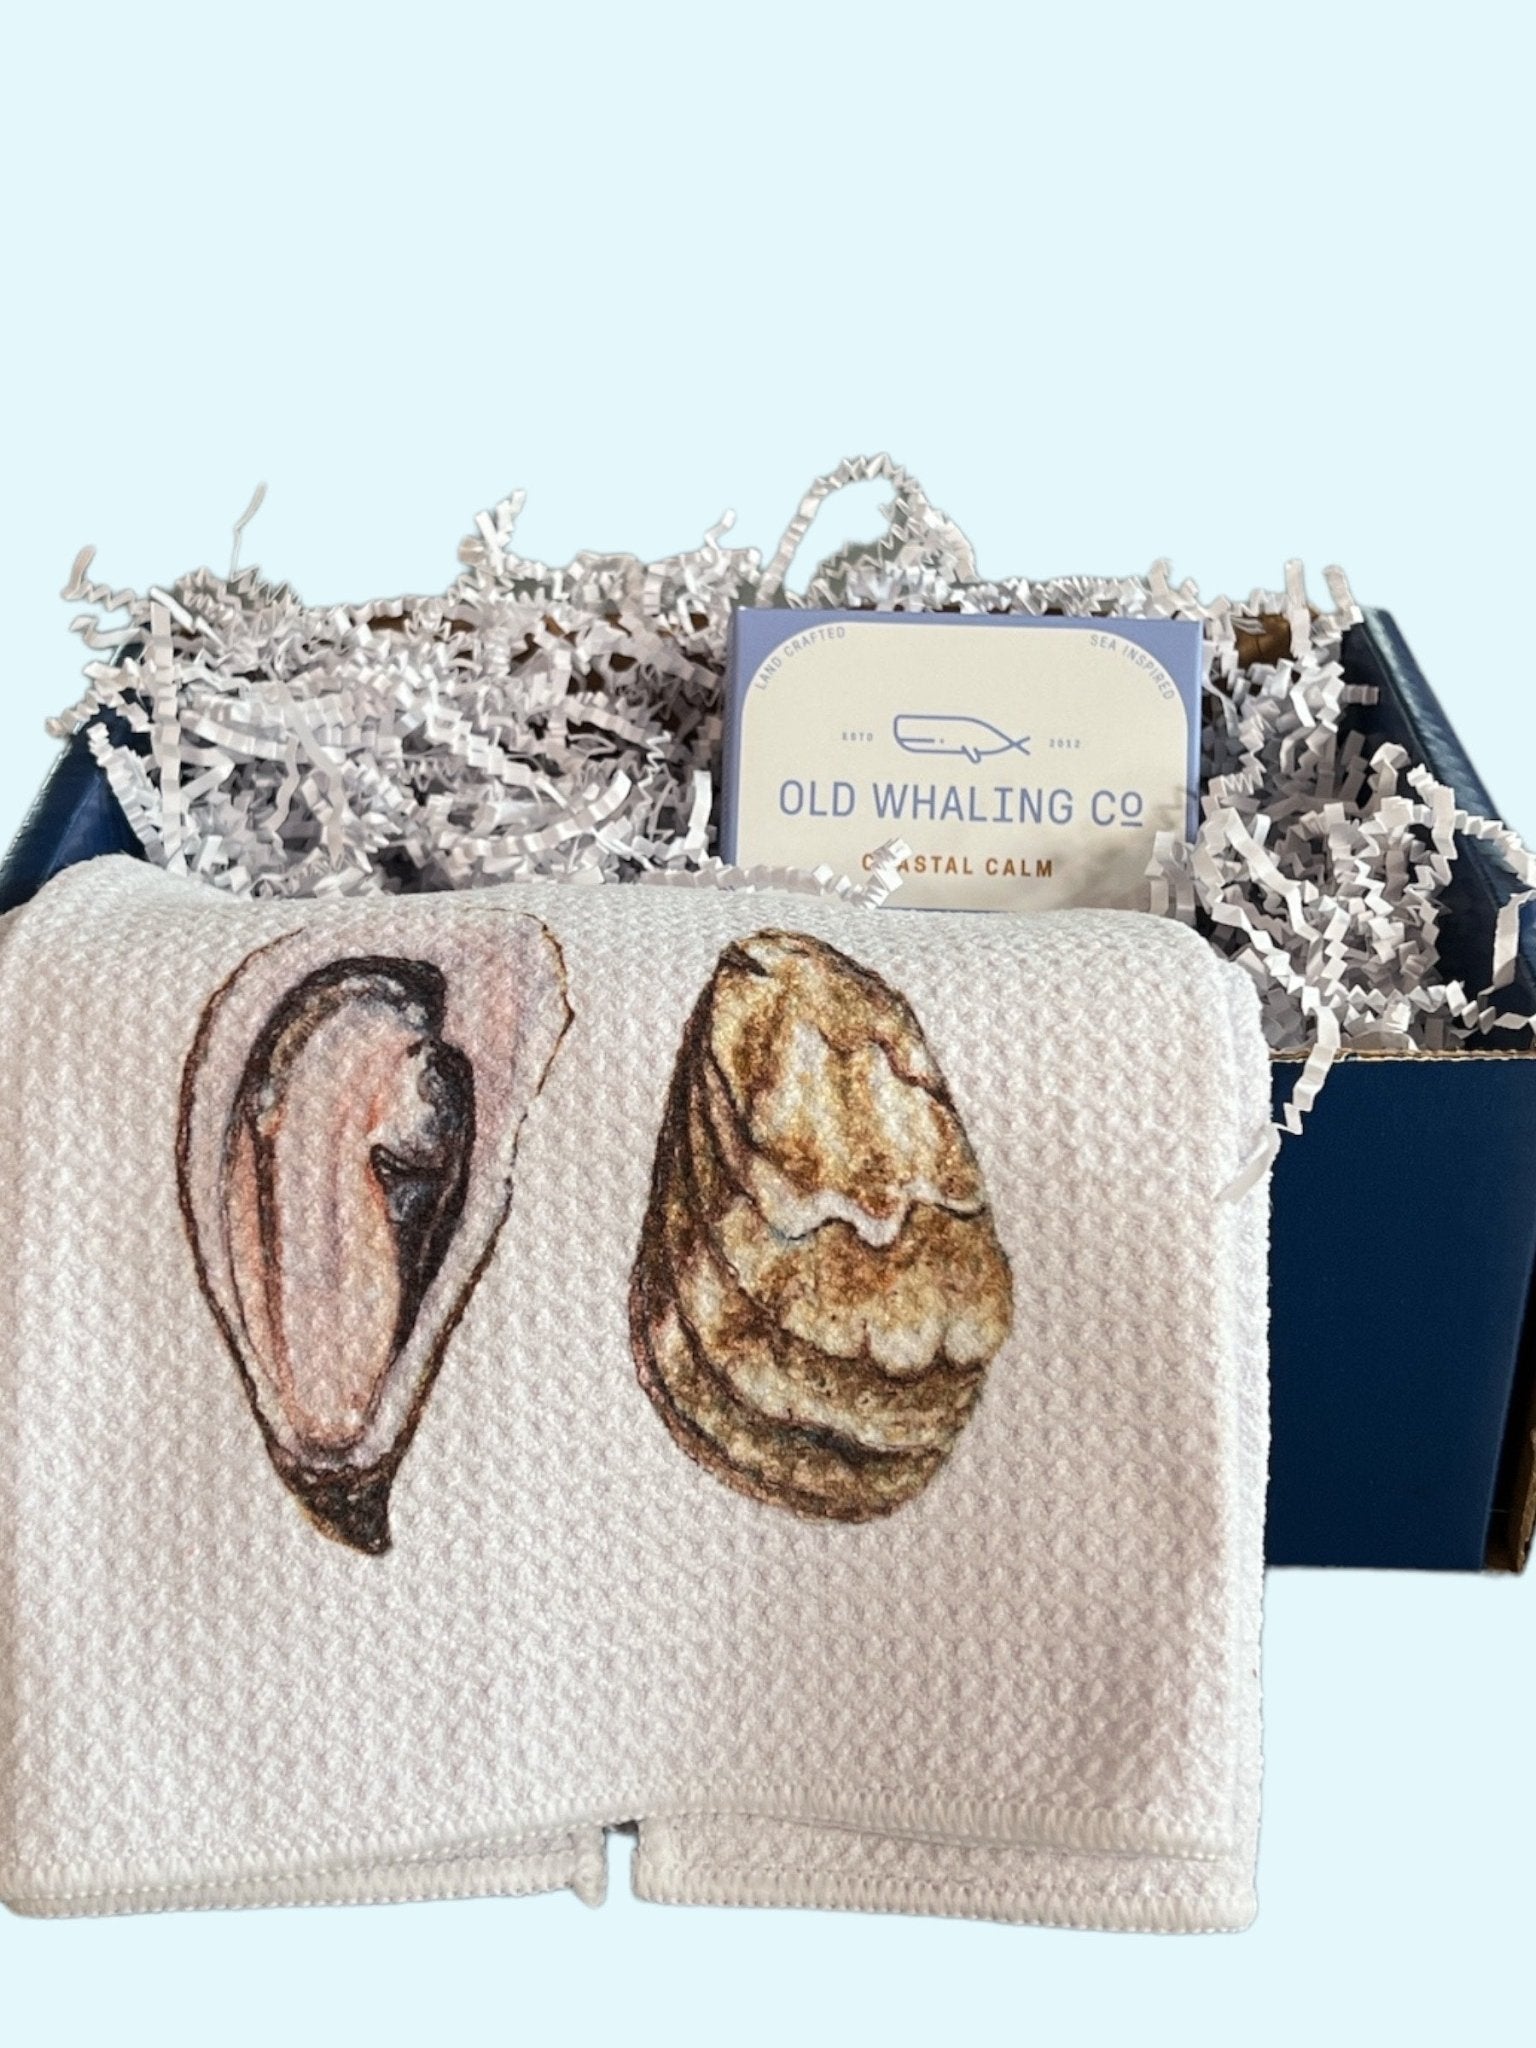 Perfect Pair: Holy City Creations Oyster Towel + Old Whaling Co. Coastal Calm Soap - Essentially Charleston